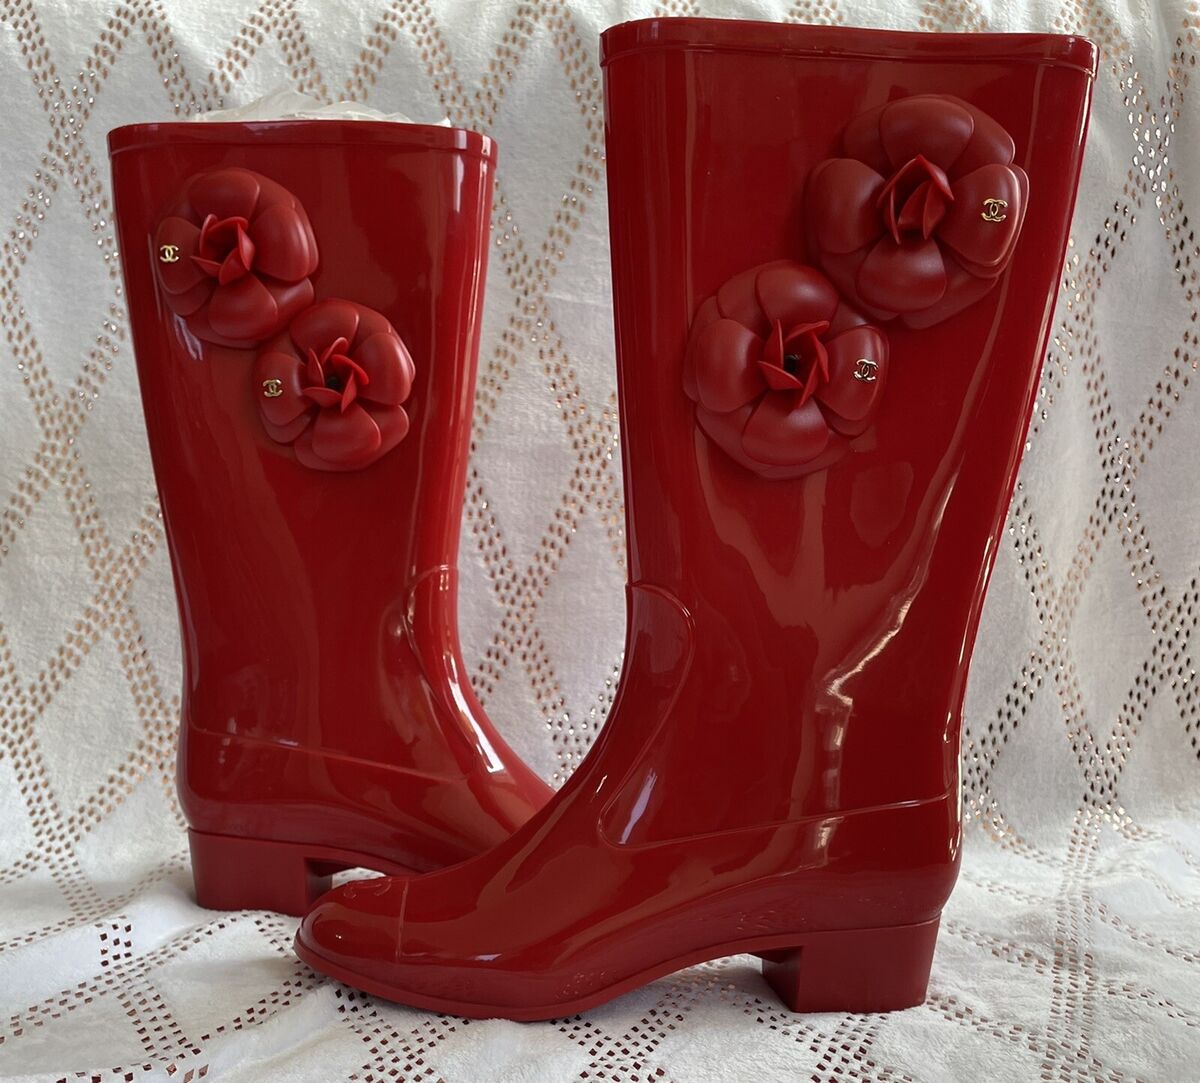 CHANEL Glossy Red Rubber Camellia Flower CC Cap Toe Heel Tall Rain Boots 41